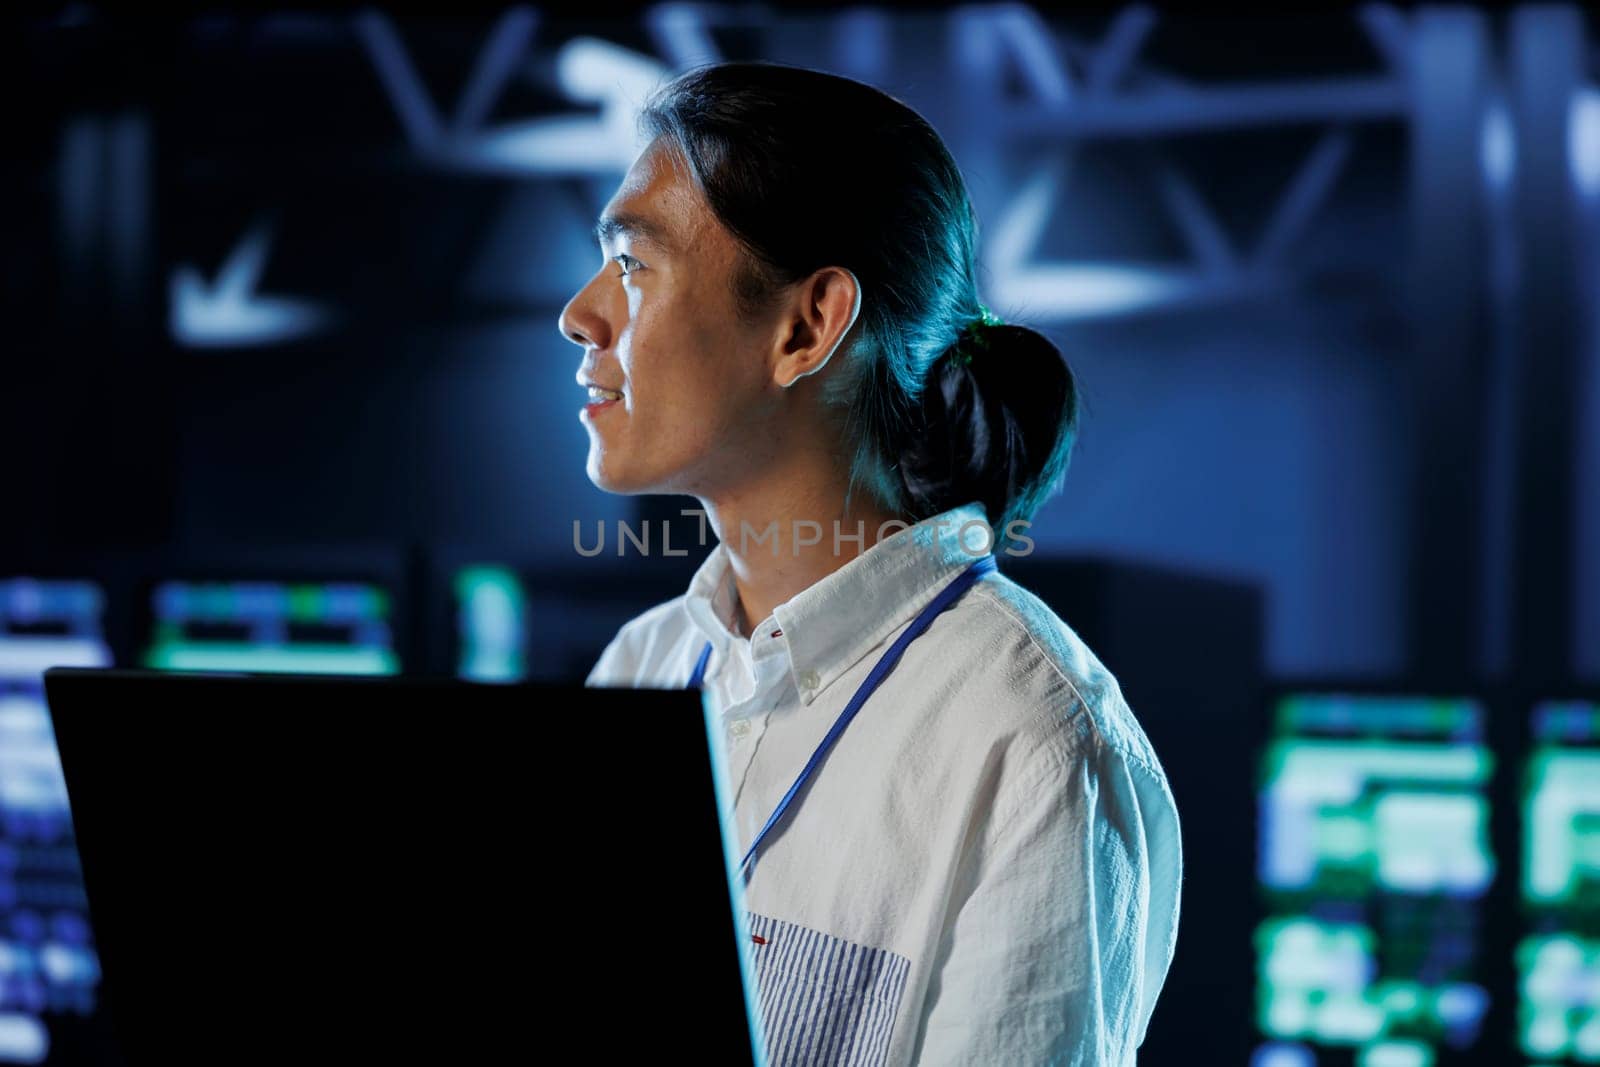 Cheerful BIPOC man between server hub rows providing processing resources for businesses worldwide. Computer scientist fixing data center mainframes tasked with managing massive databases